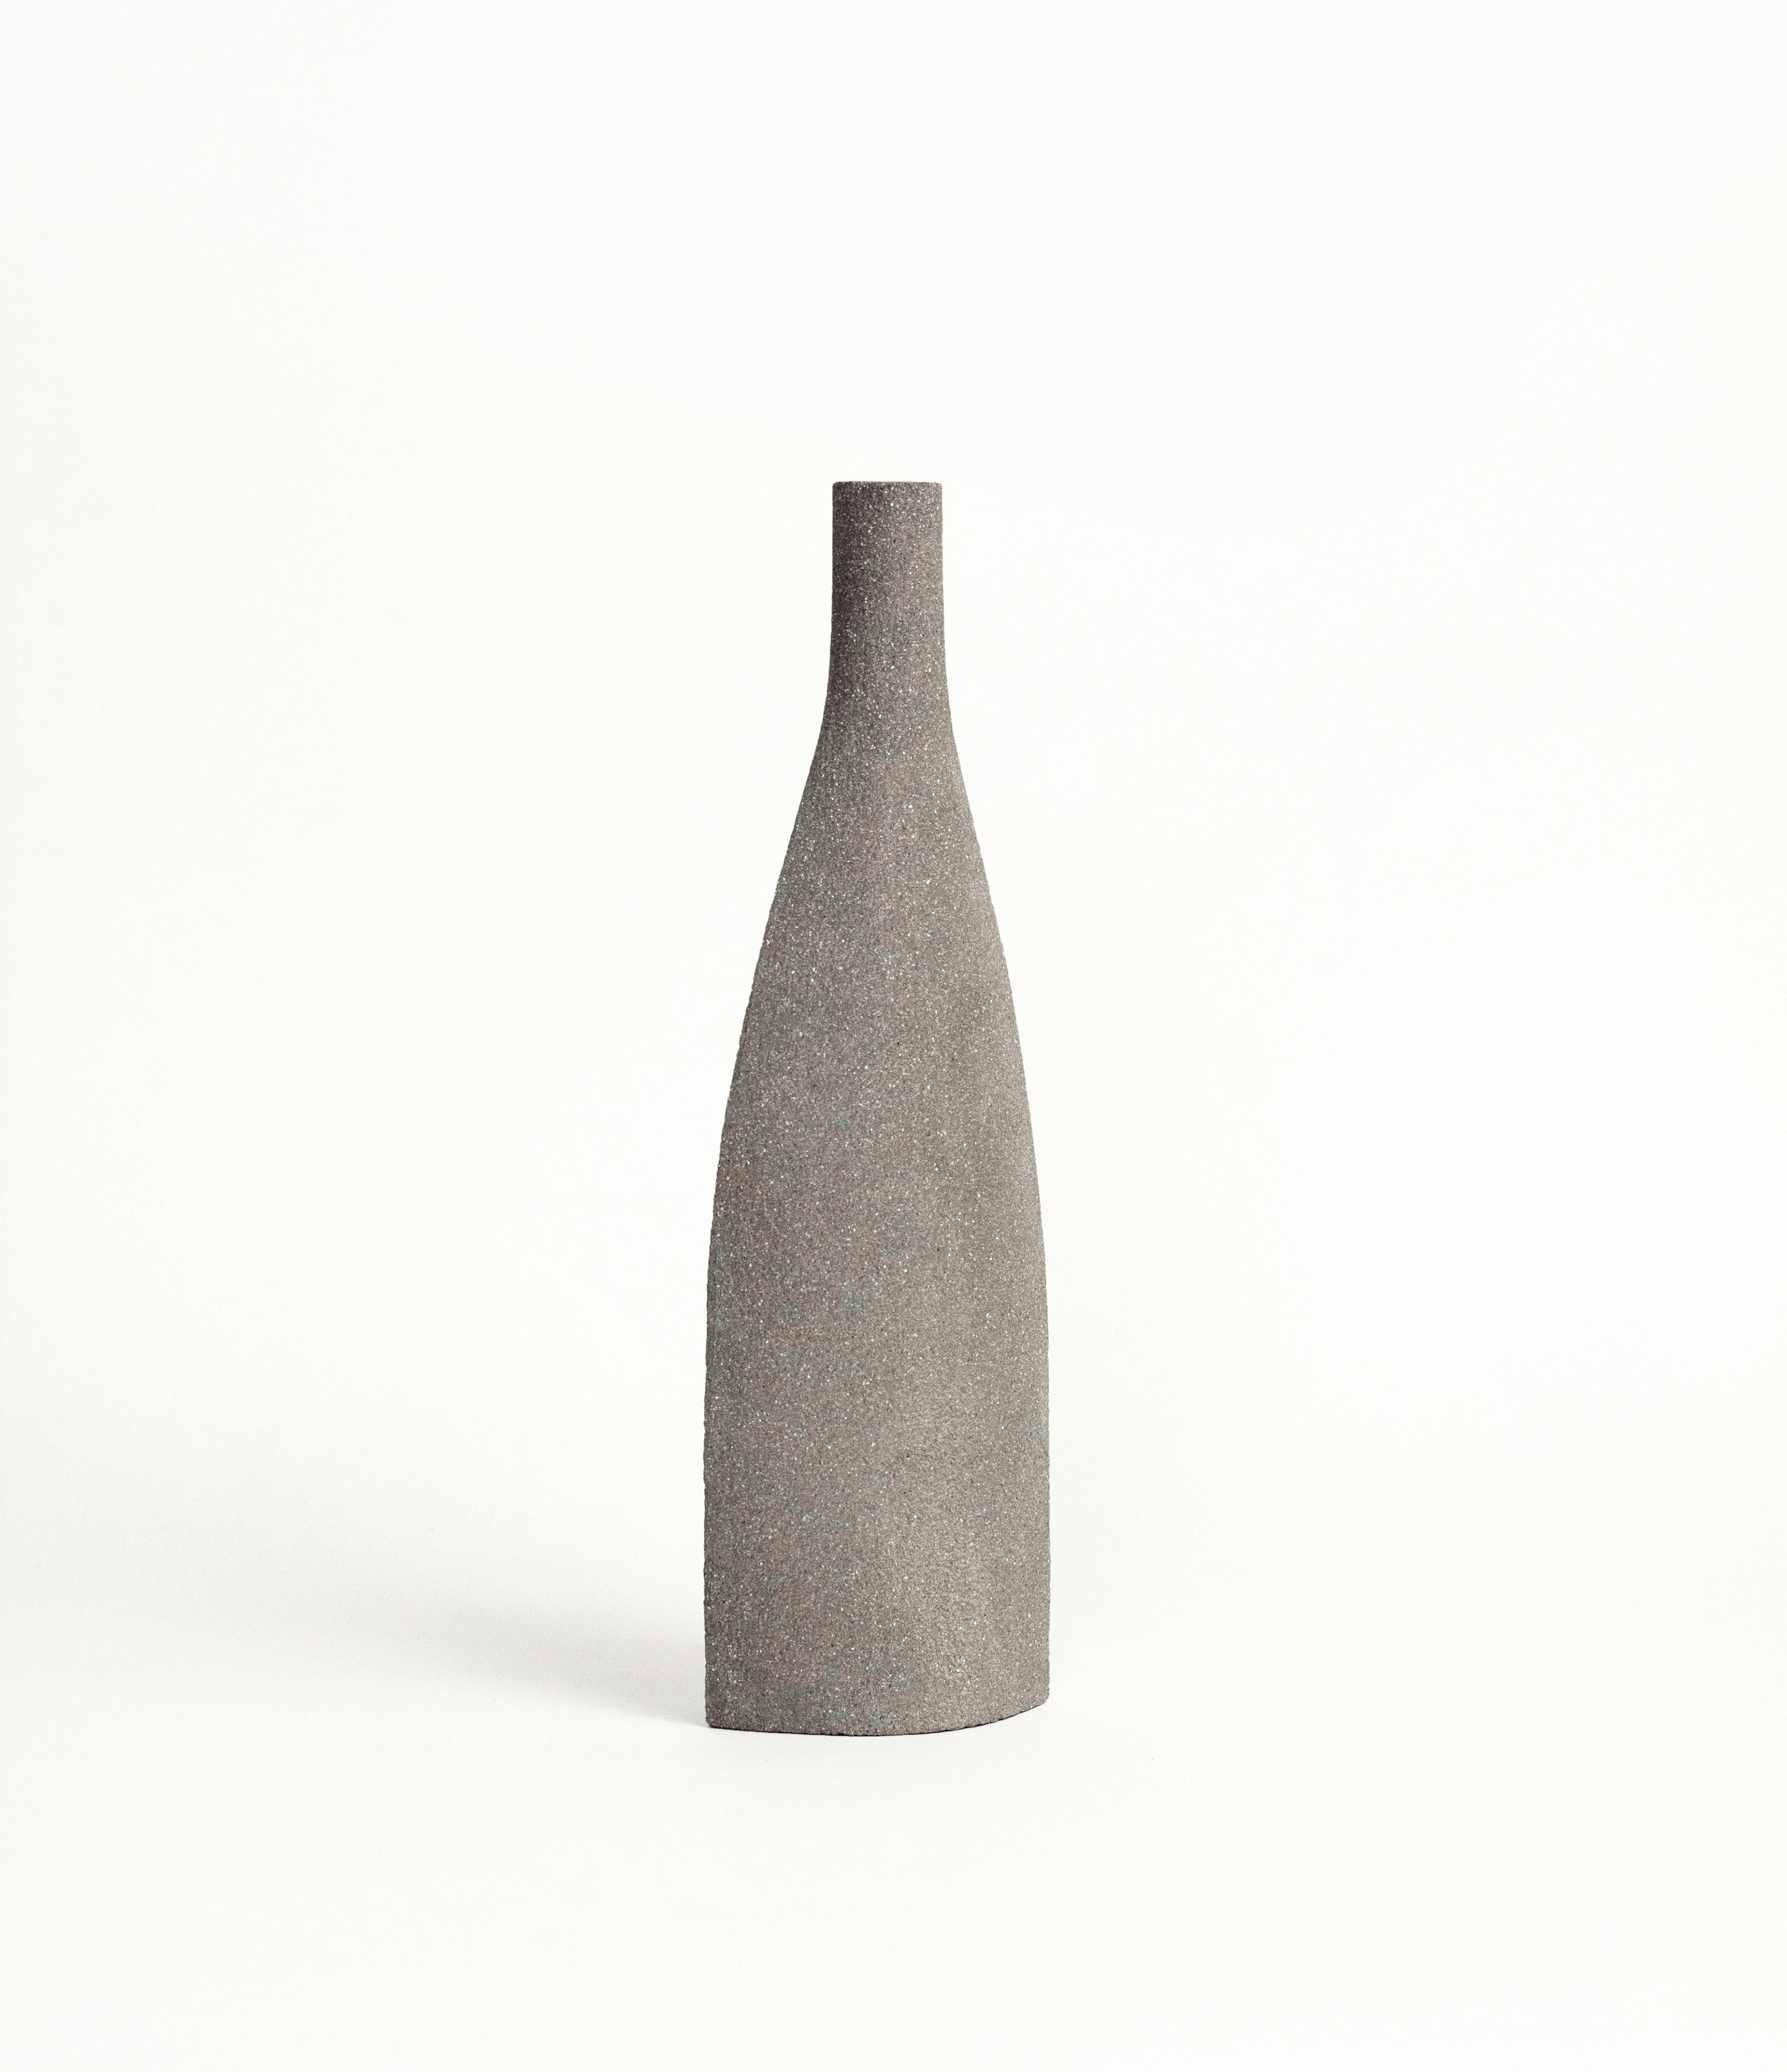 Bouteille [M] - Grey

Hand-crafted in our studio in France.

Measures: H: 28 CM / L: 10 CM
H: 11 inch / L: 4 inch.

- Stoneware fired at high temperature finished with transparent glossy glaze inside.
- Raw exterior showcasing the natural